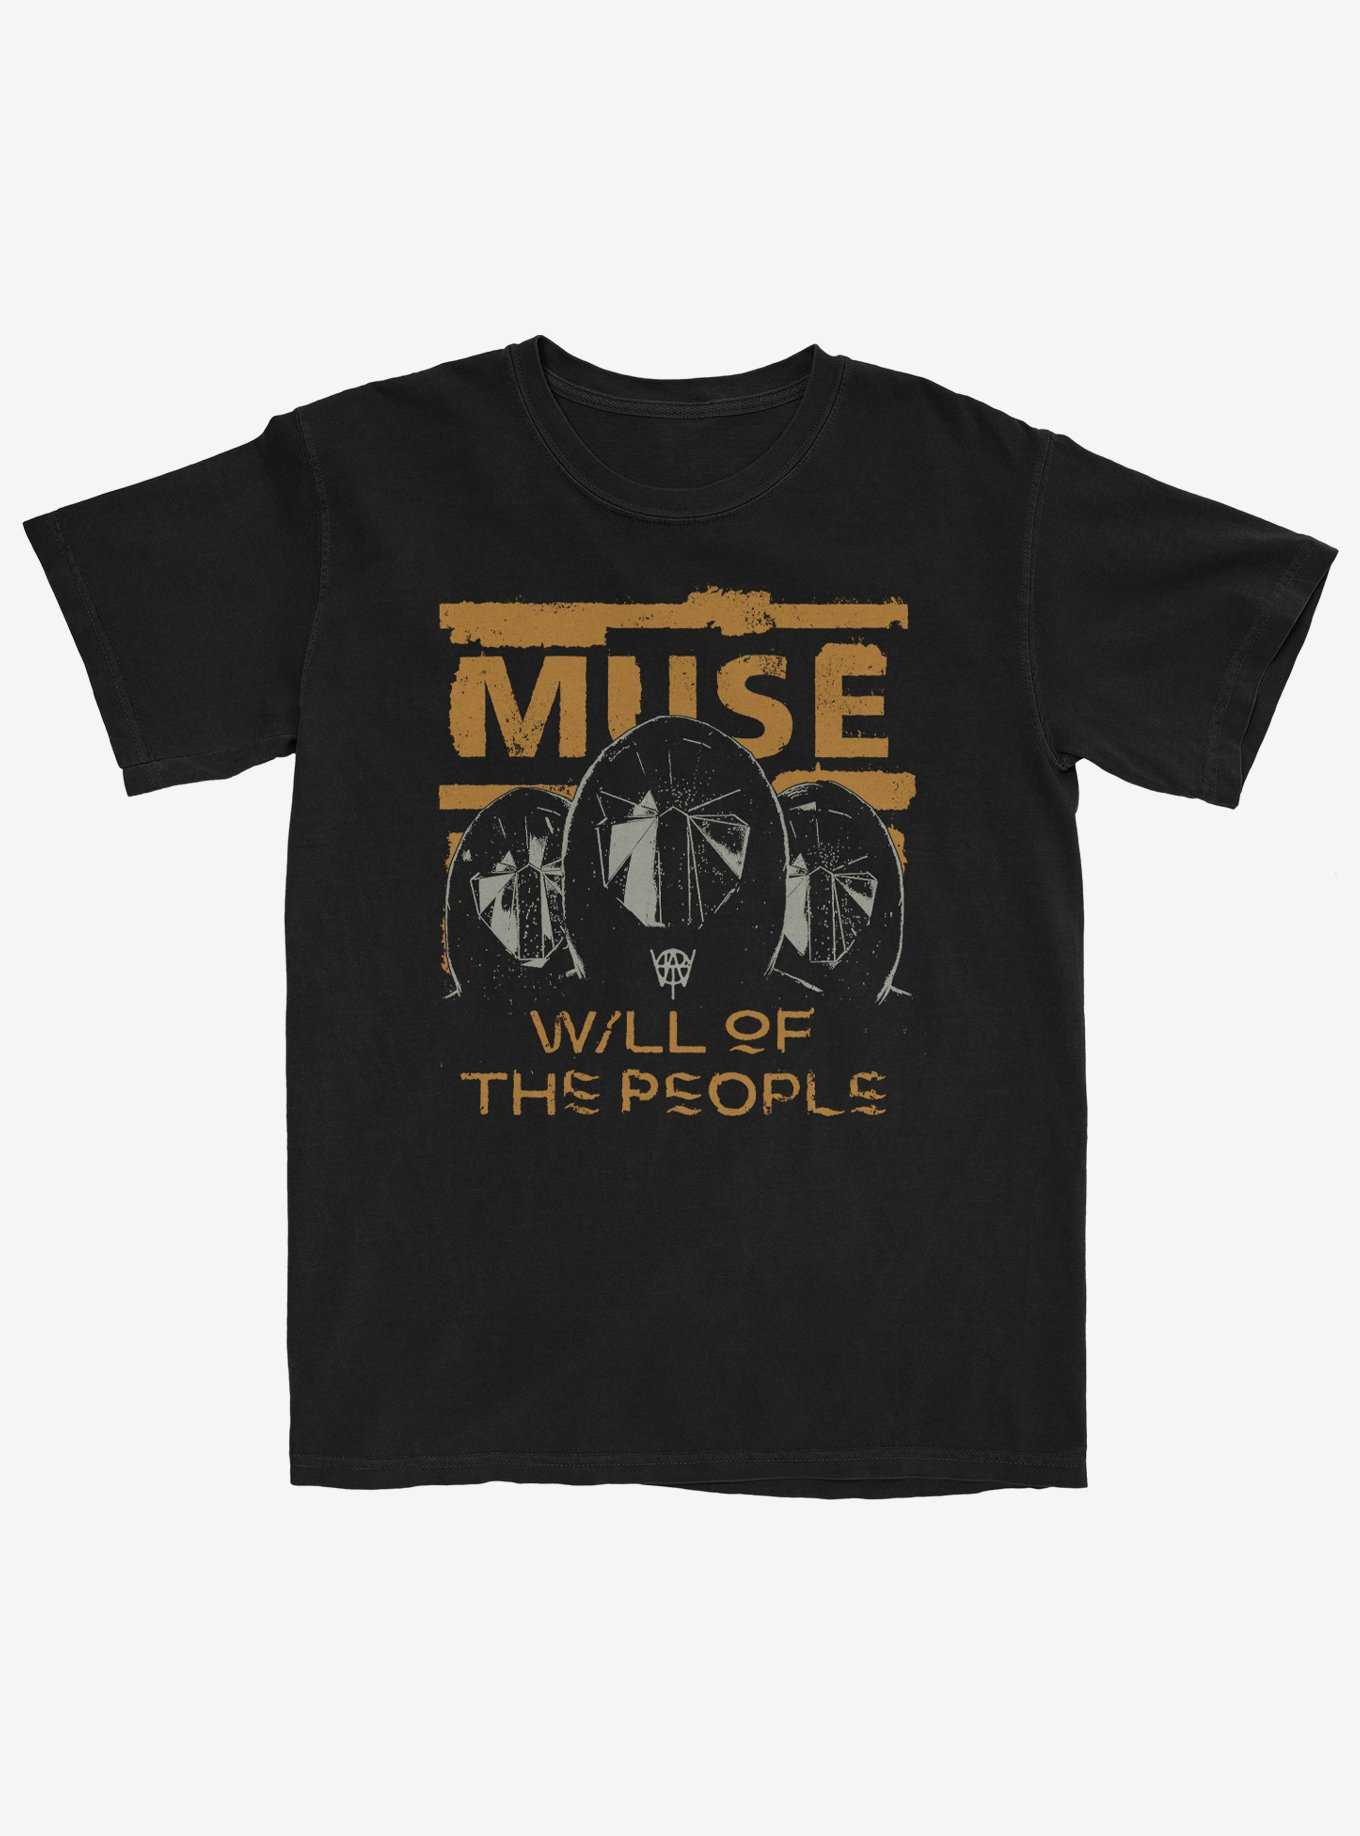 Muse Will Of The People Boyfriend Fit Girls T-Shirt, , hi-res